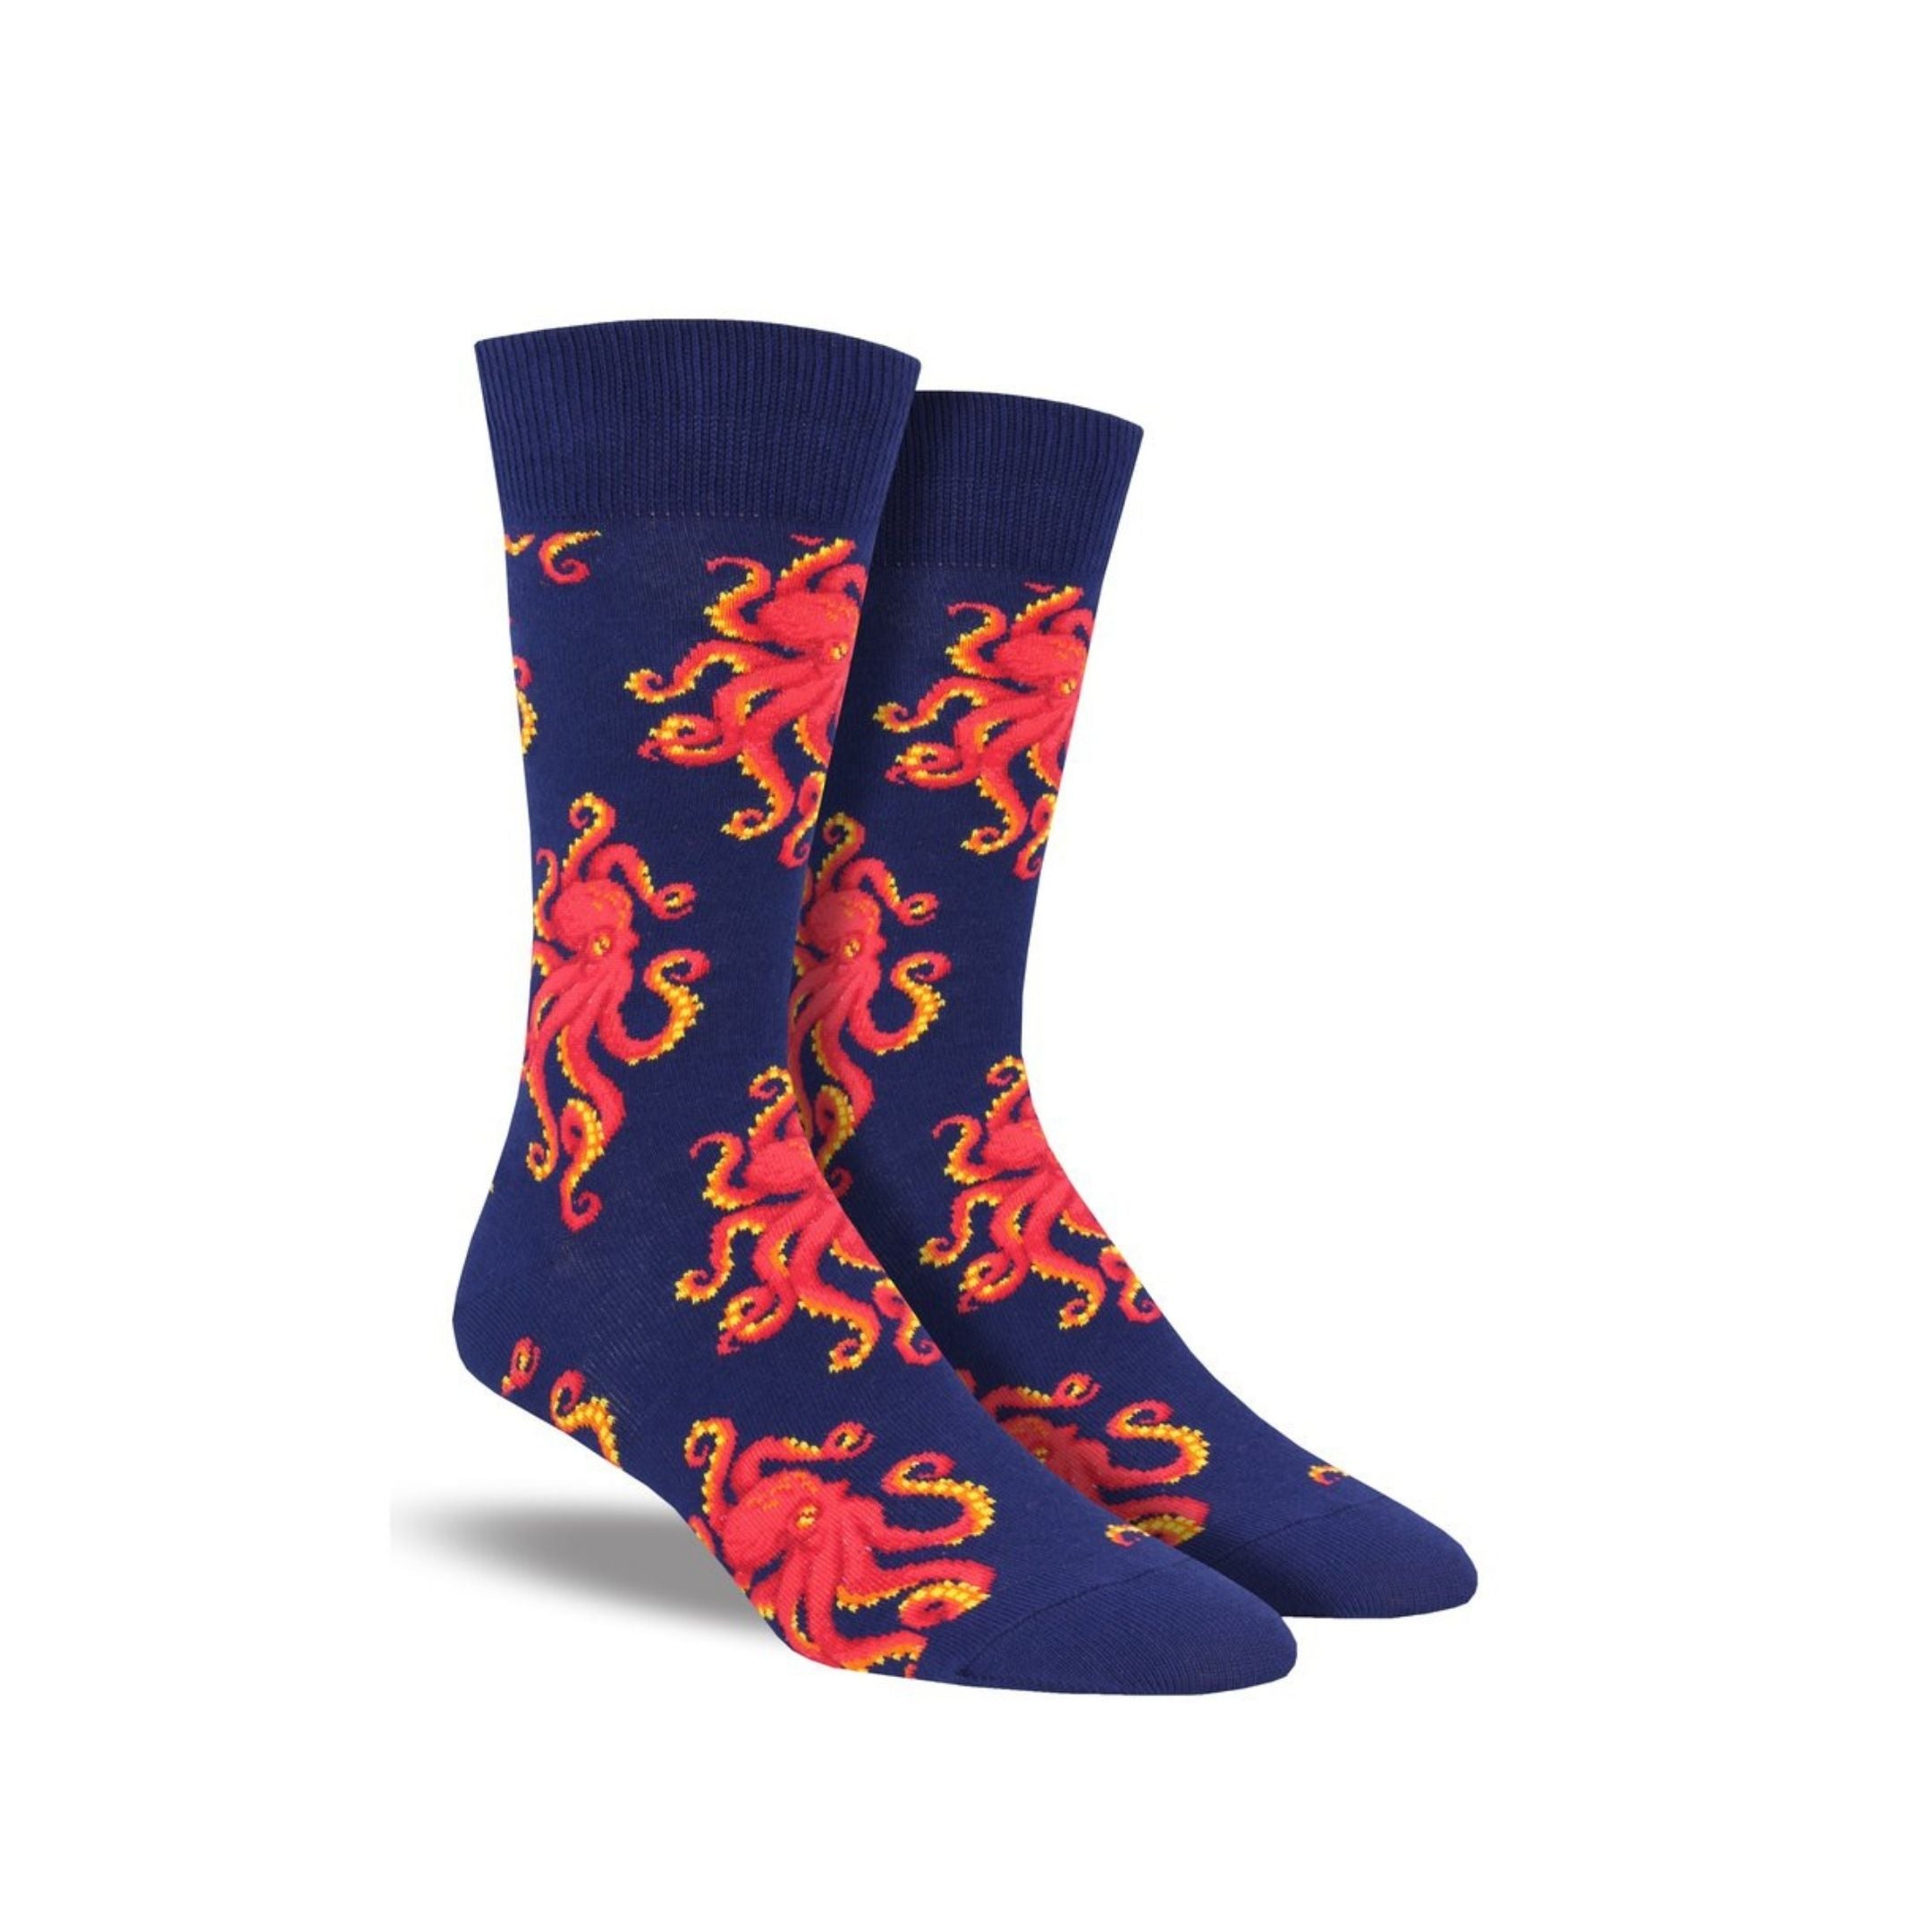 Blue socks covered with more than one octopus